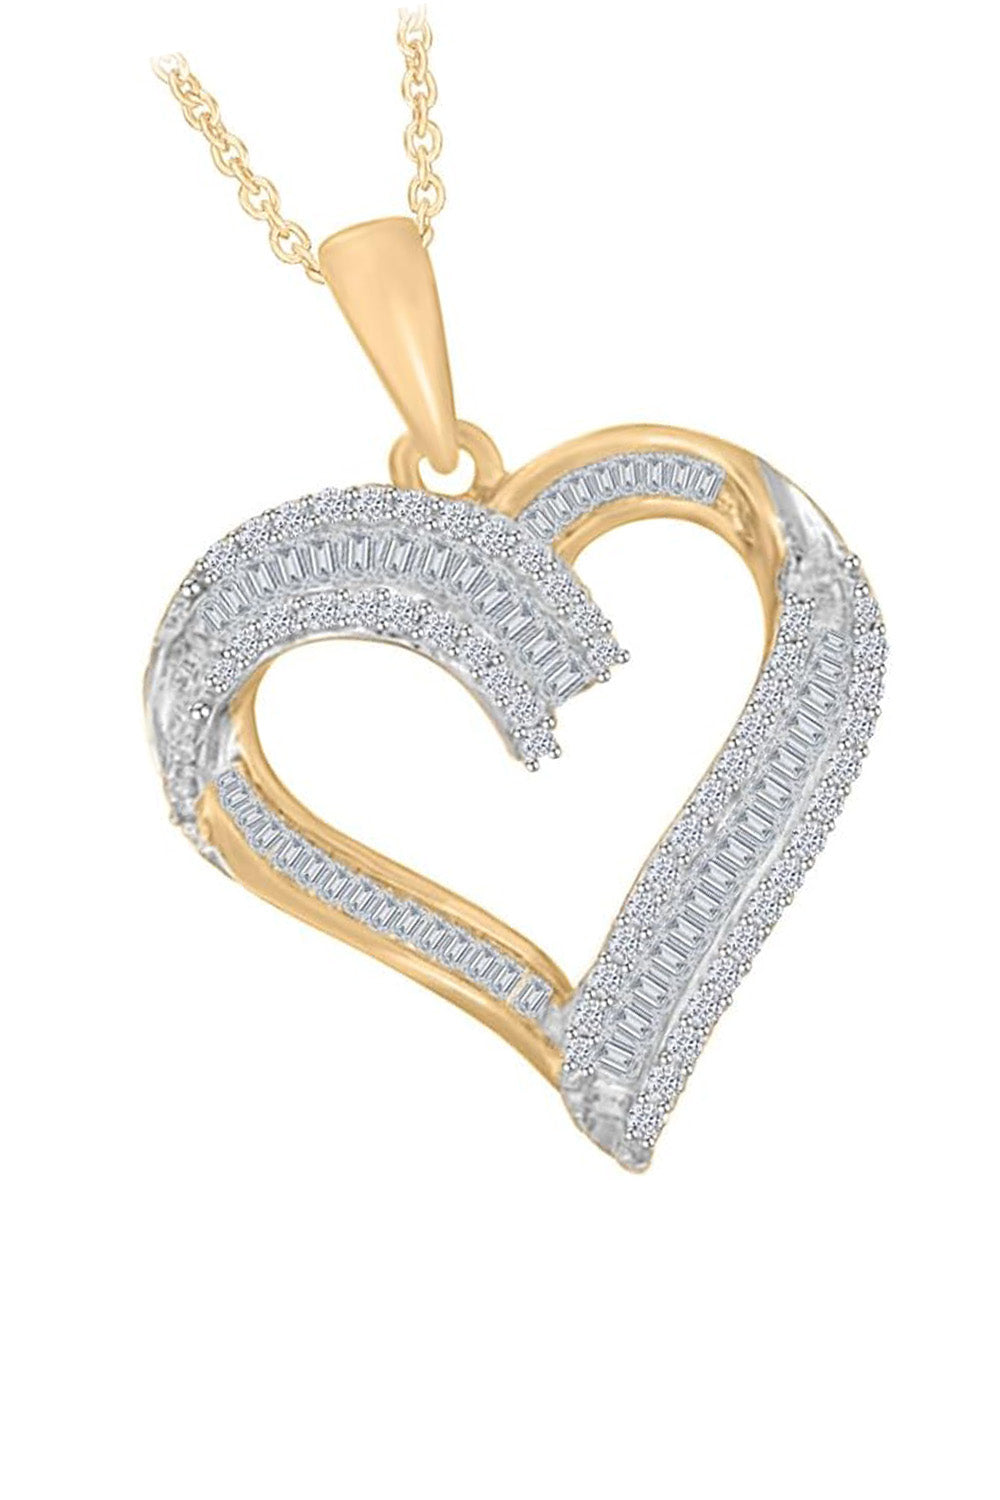 Yellow Gold Color Baguette Cut and Round Moissanite Heart Pendant